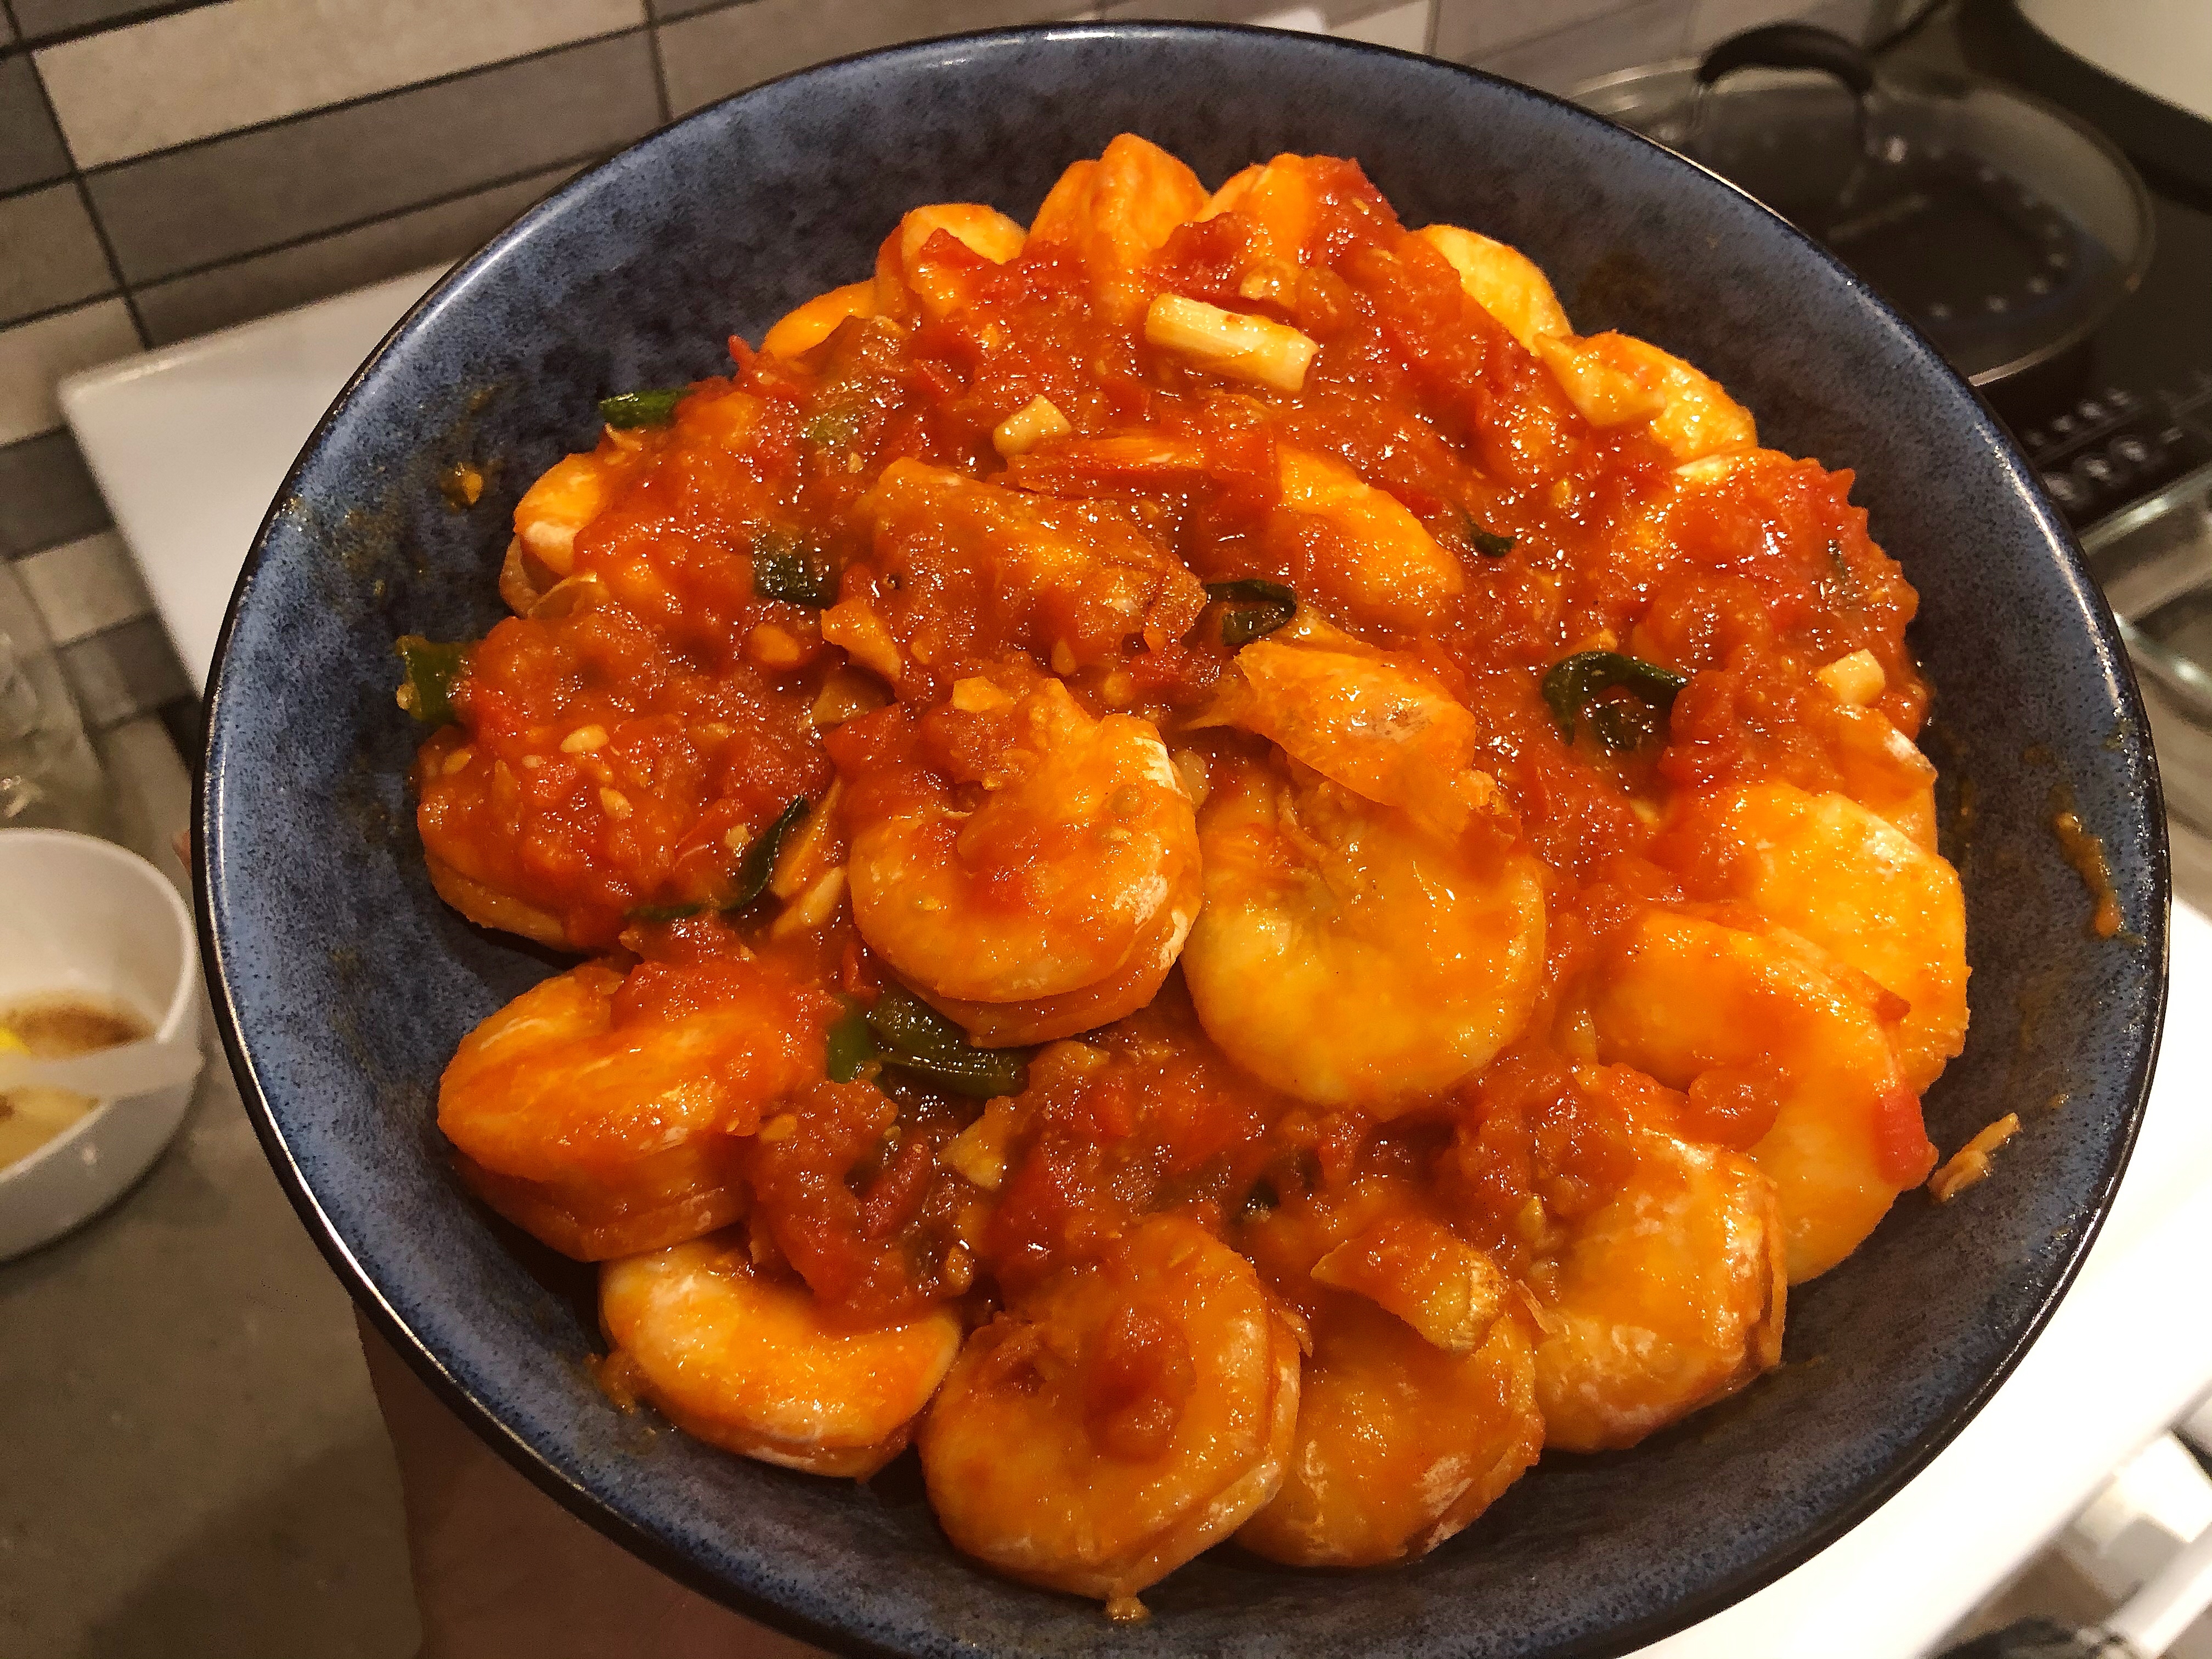 
Shrimp of tomato oily stew (exceed go with rice) practice